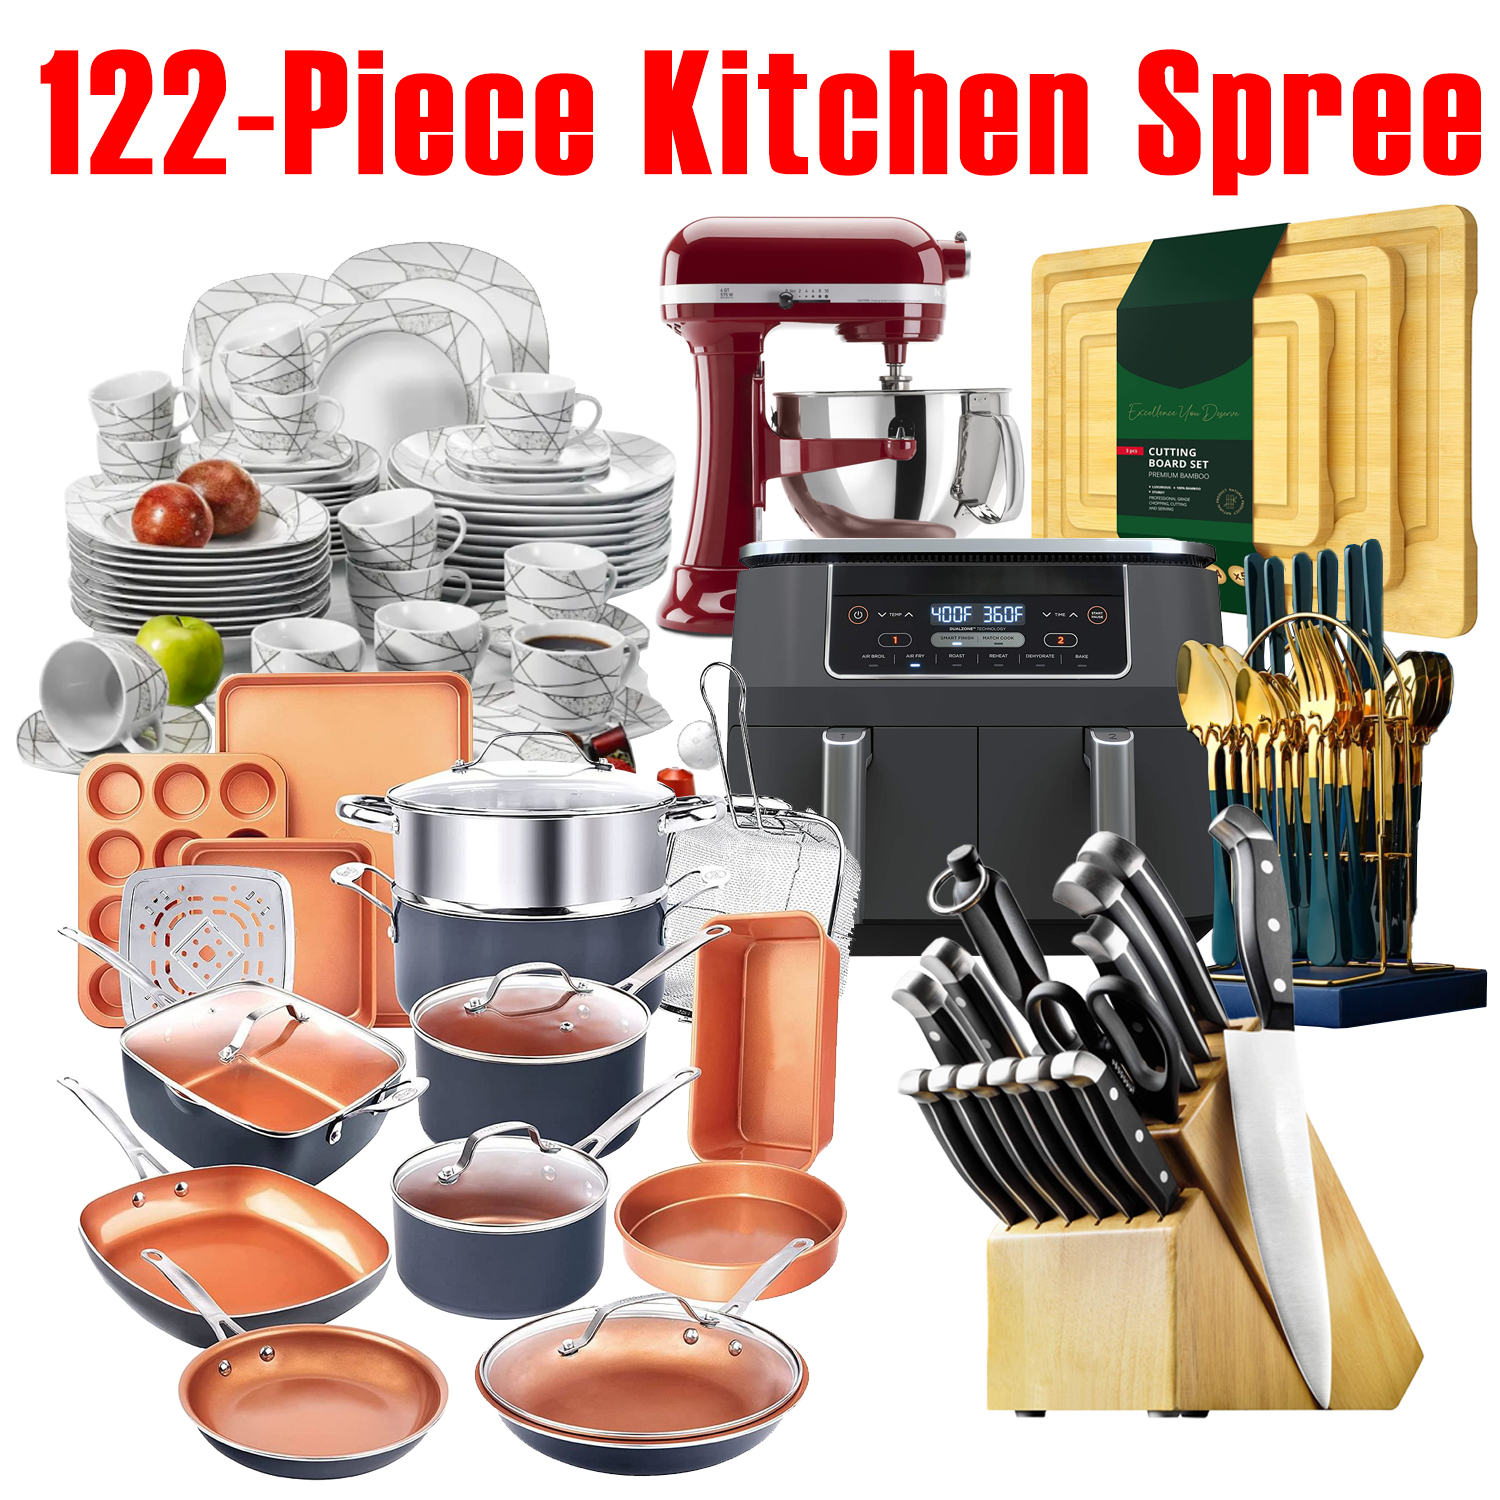 Limited-time Promotion, 122-piece Kitchen Spree, Meeting All The Needs Of The Kitchen